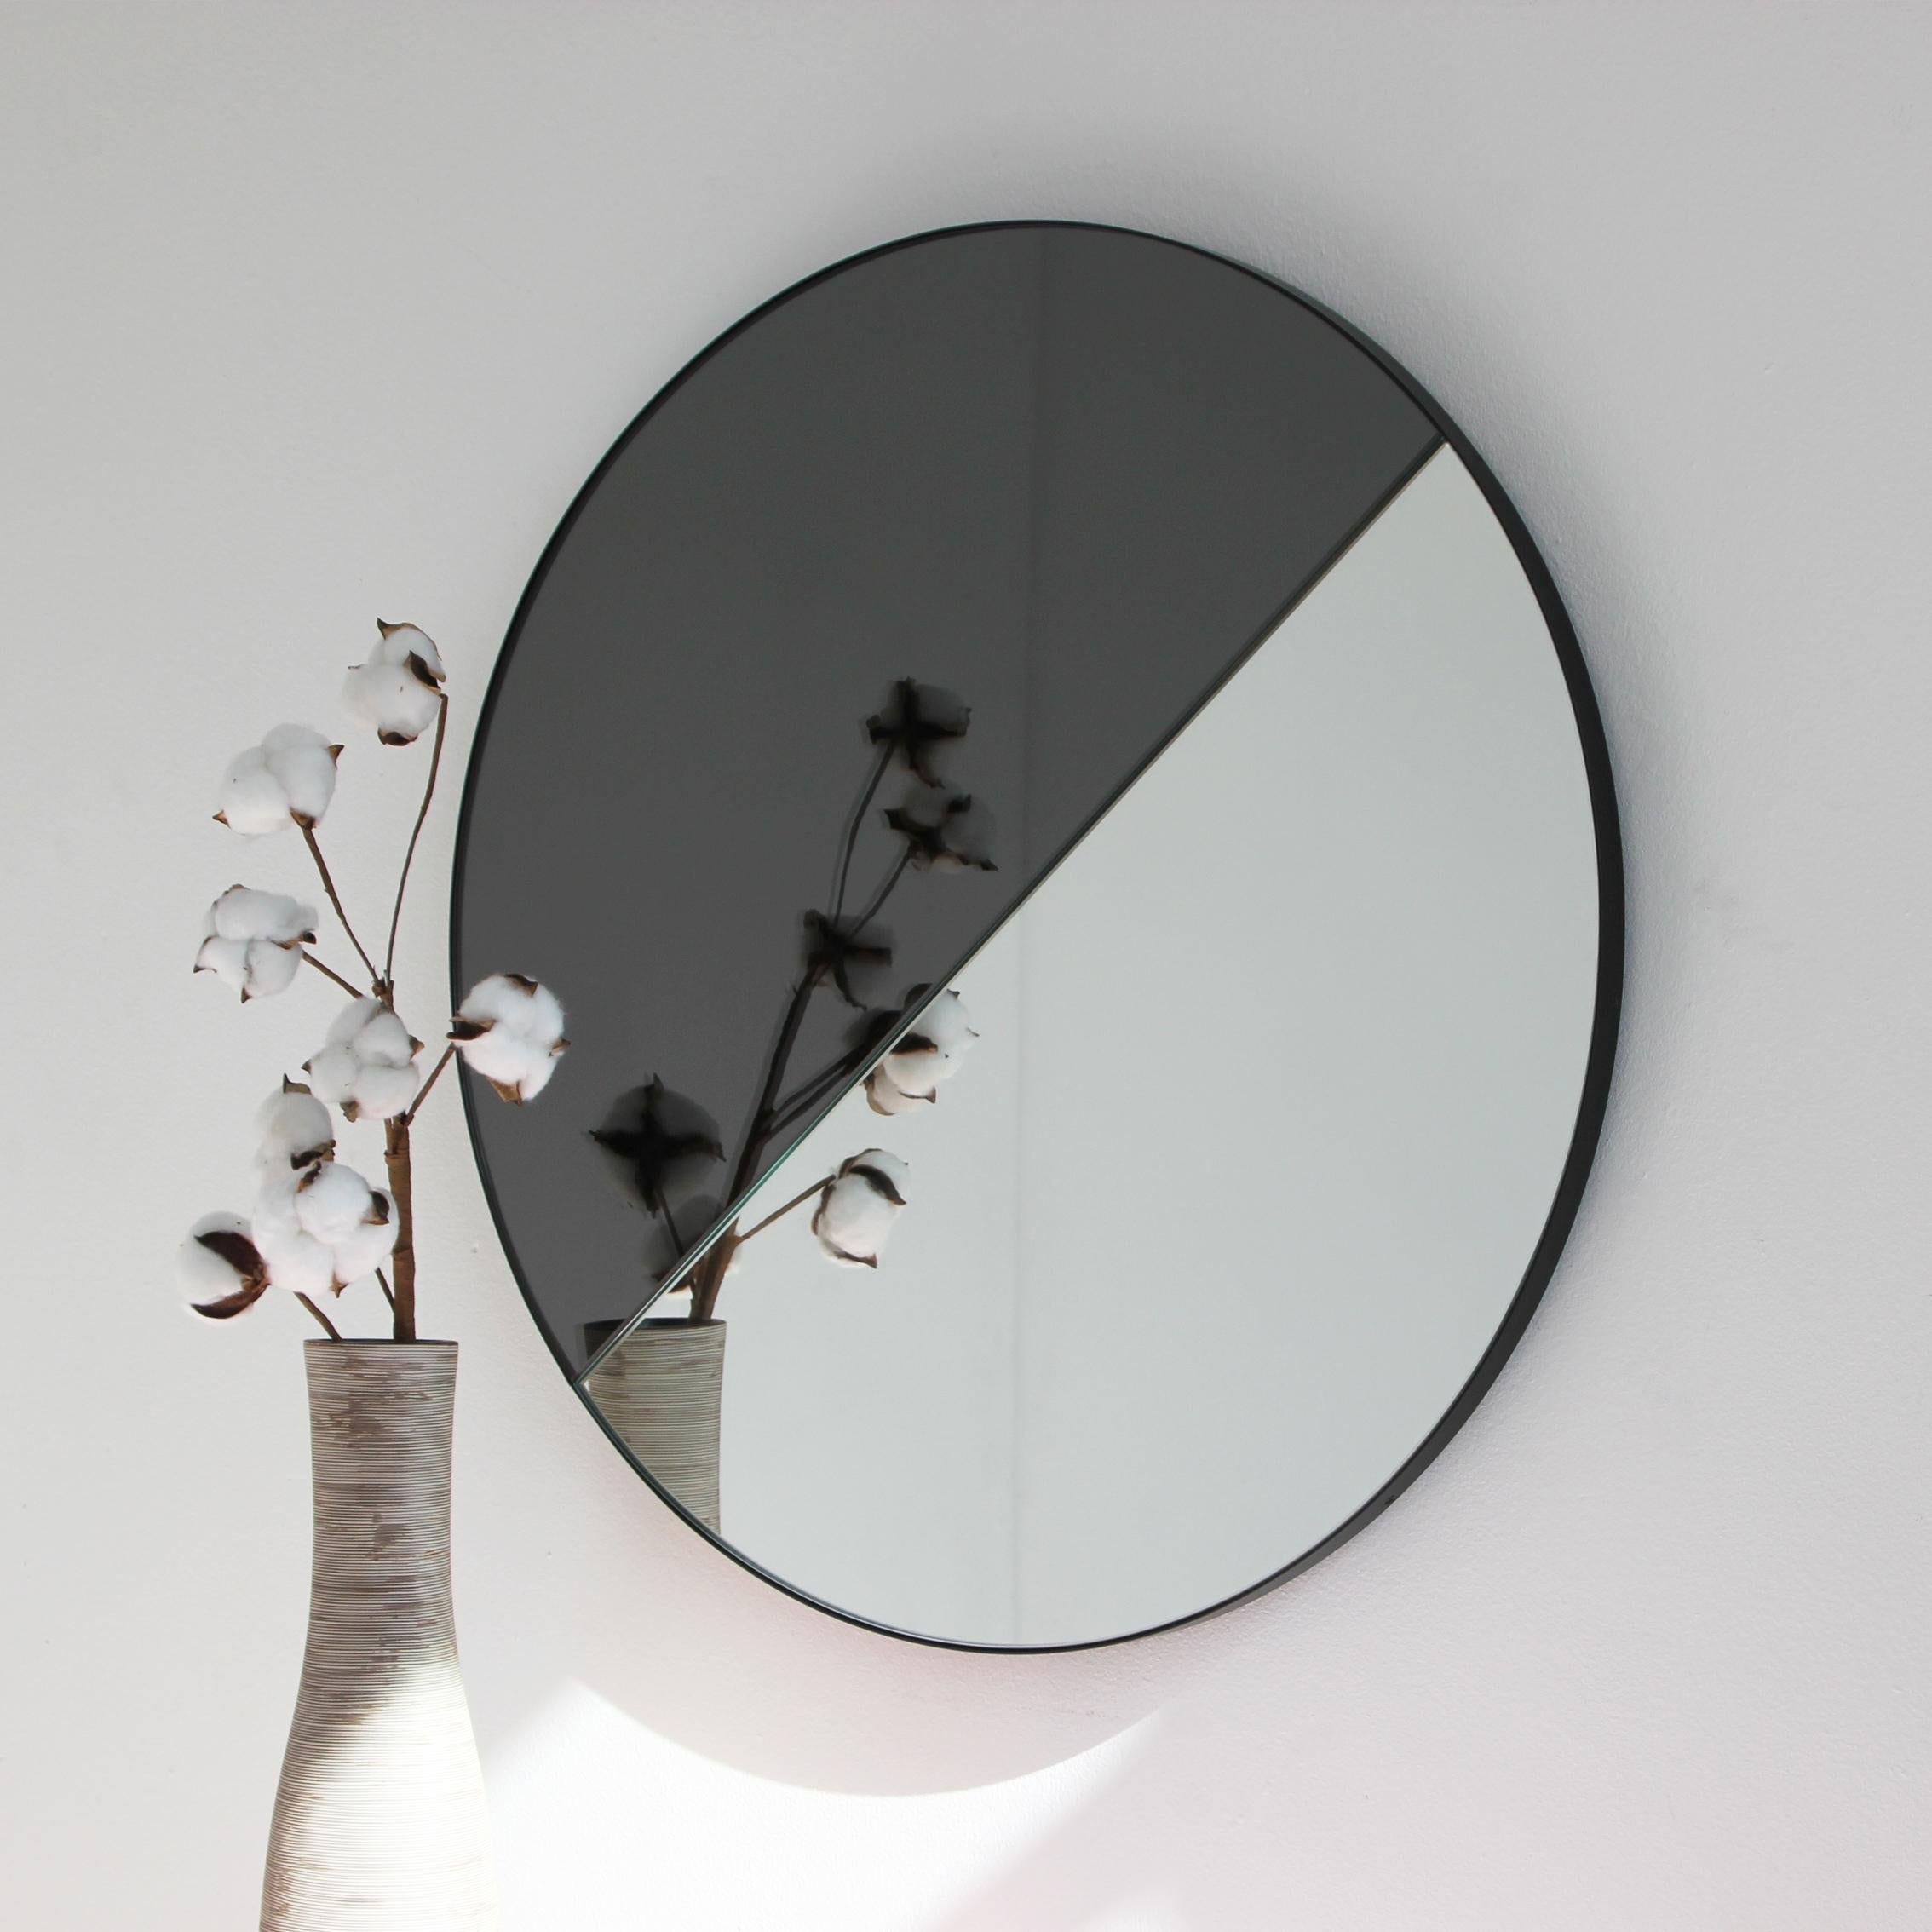 British Orbis Dualis Mixed Tint Contemporary Round Mirror with Black Frame, Large For Sale